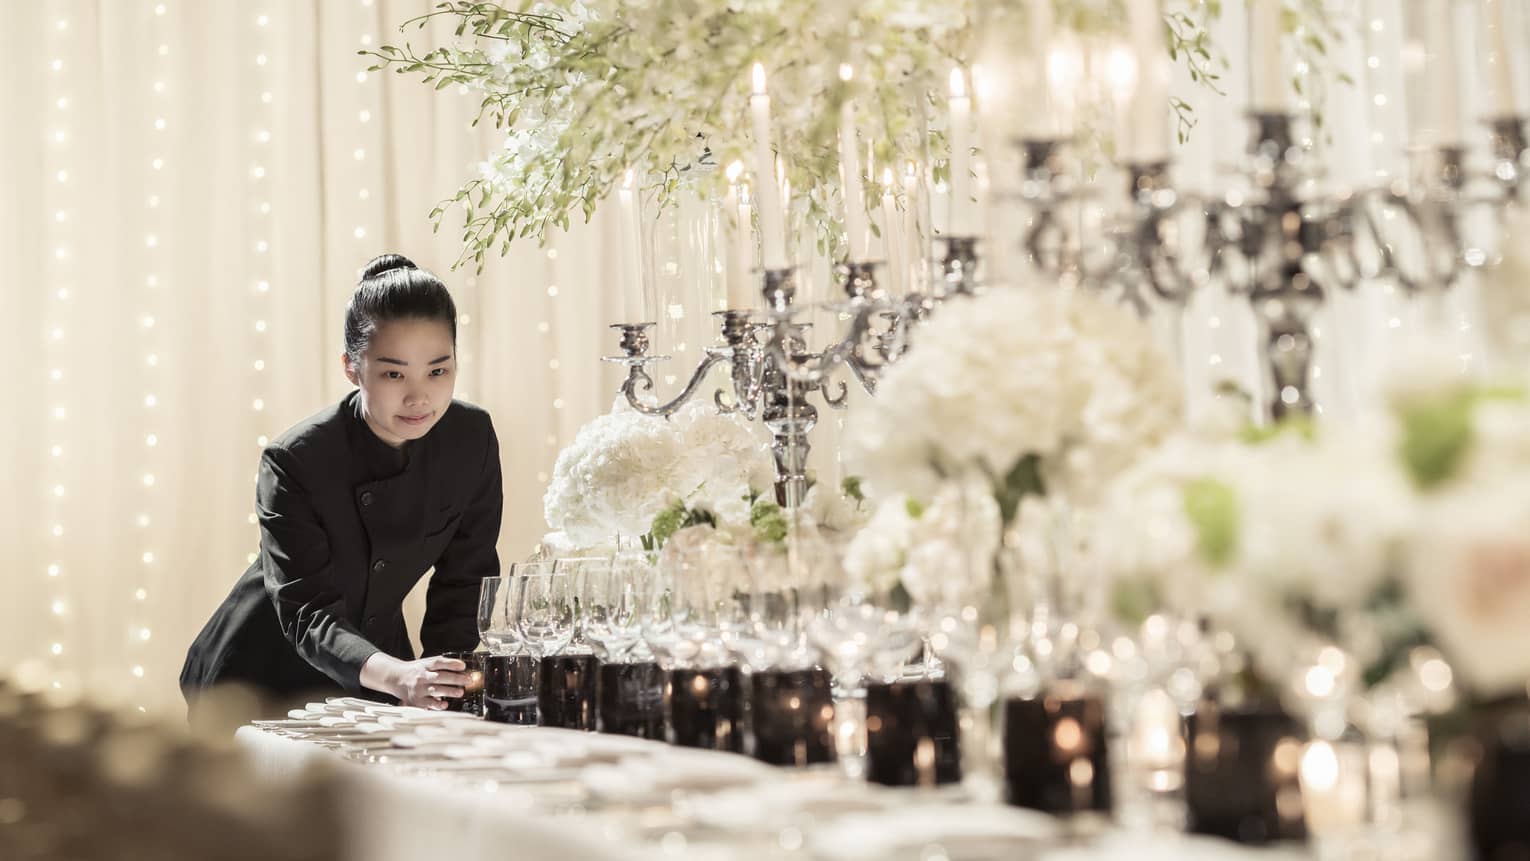 Hotel staff places candle at end of long formal dining table set with candelabras, sparkling lights